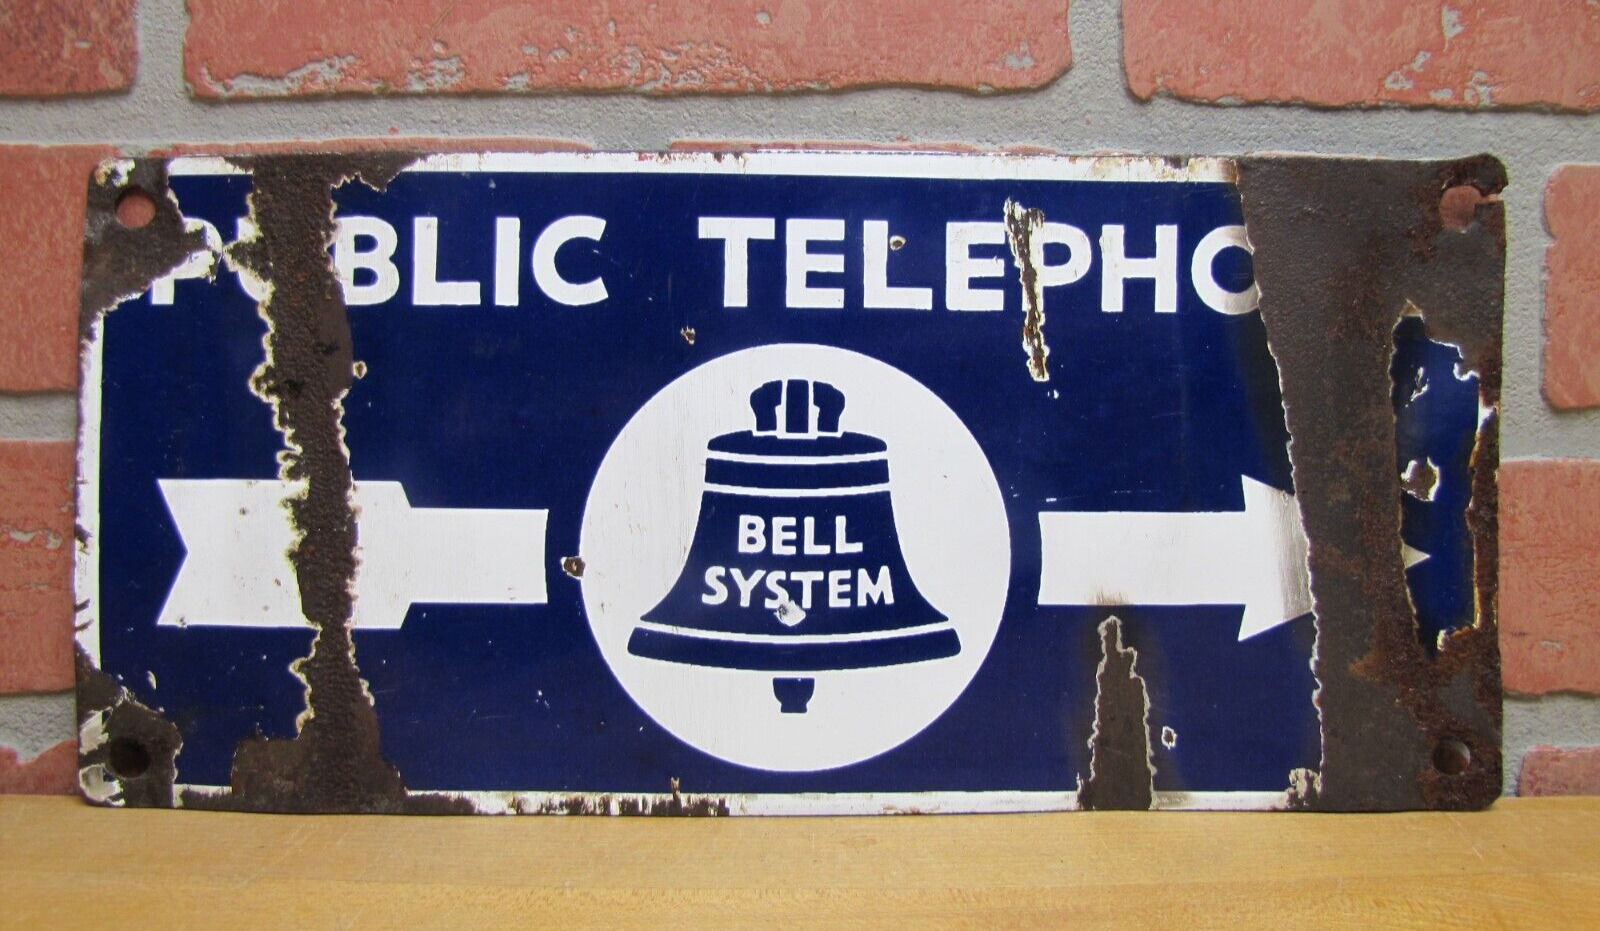 BELL SYSTEM PUBLIC TELEPHONE ARROW Original Old Double Sided Porcelain Ad Sign